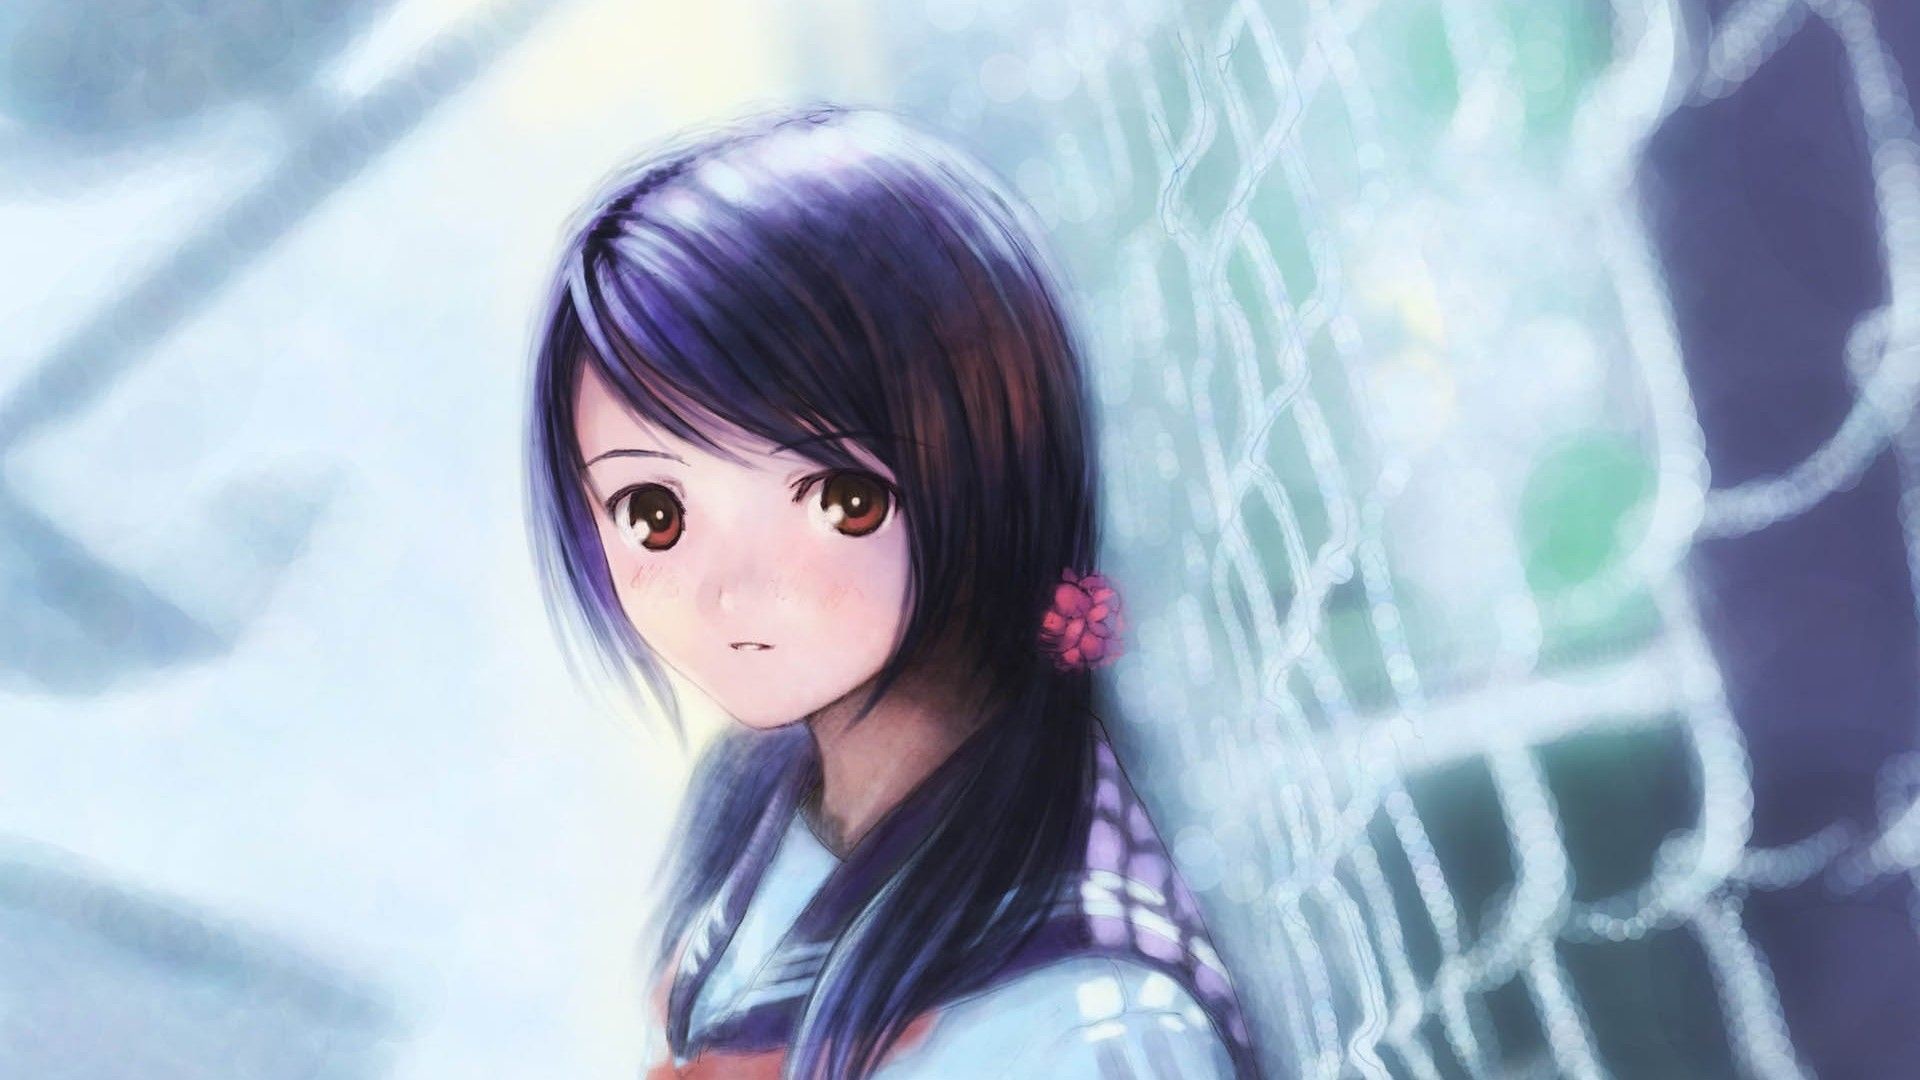 Cute Anime Girl Hd Wallpapers - Animation Girl Images Hd - HD Wallpaper 